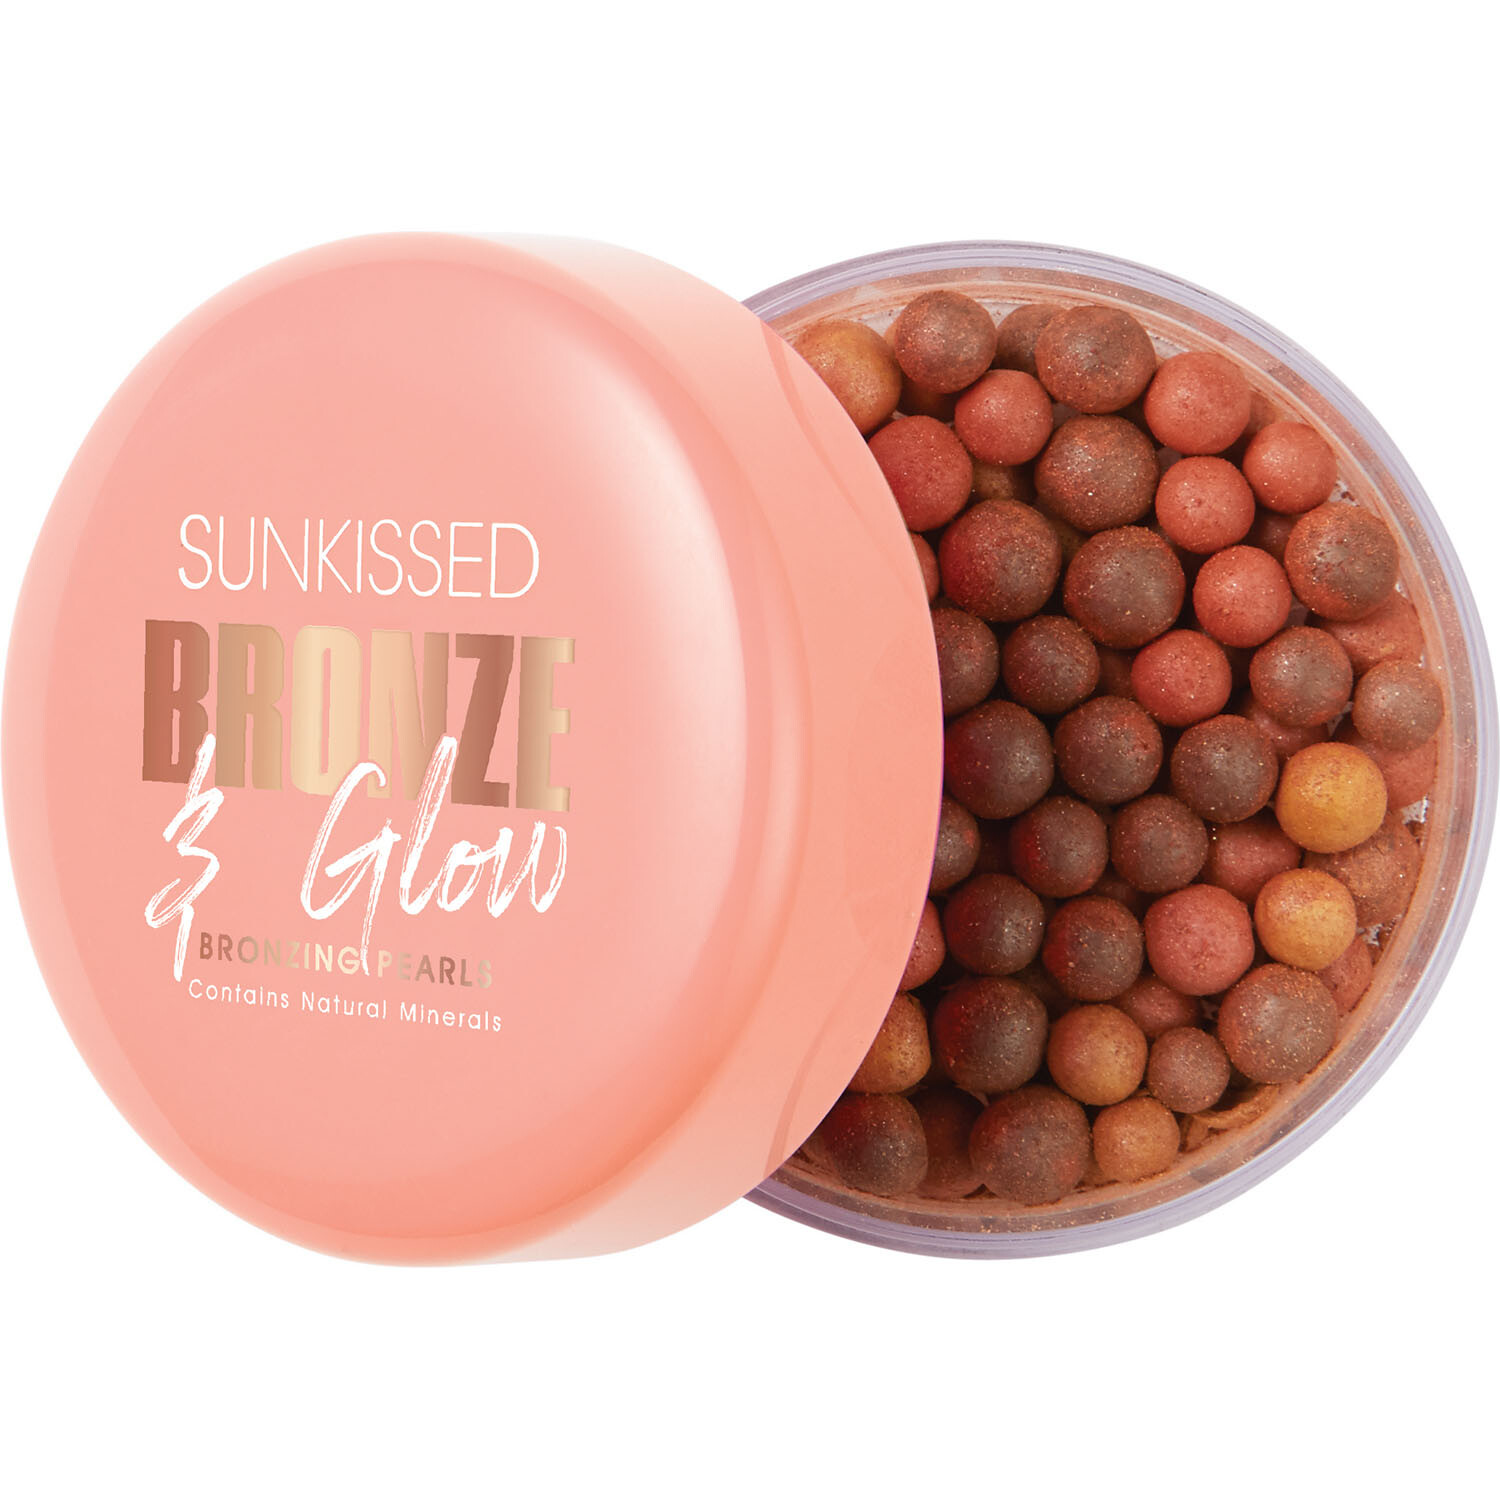 Sunkissed Bronze and Glow Bronzing Pearls Image 2